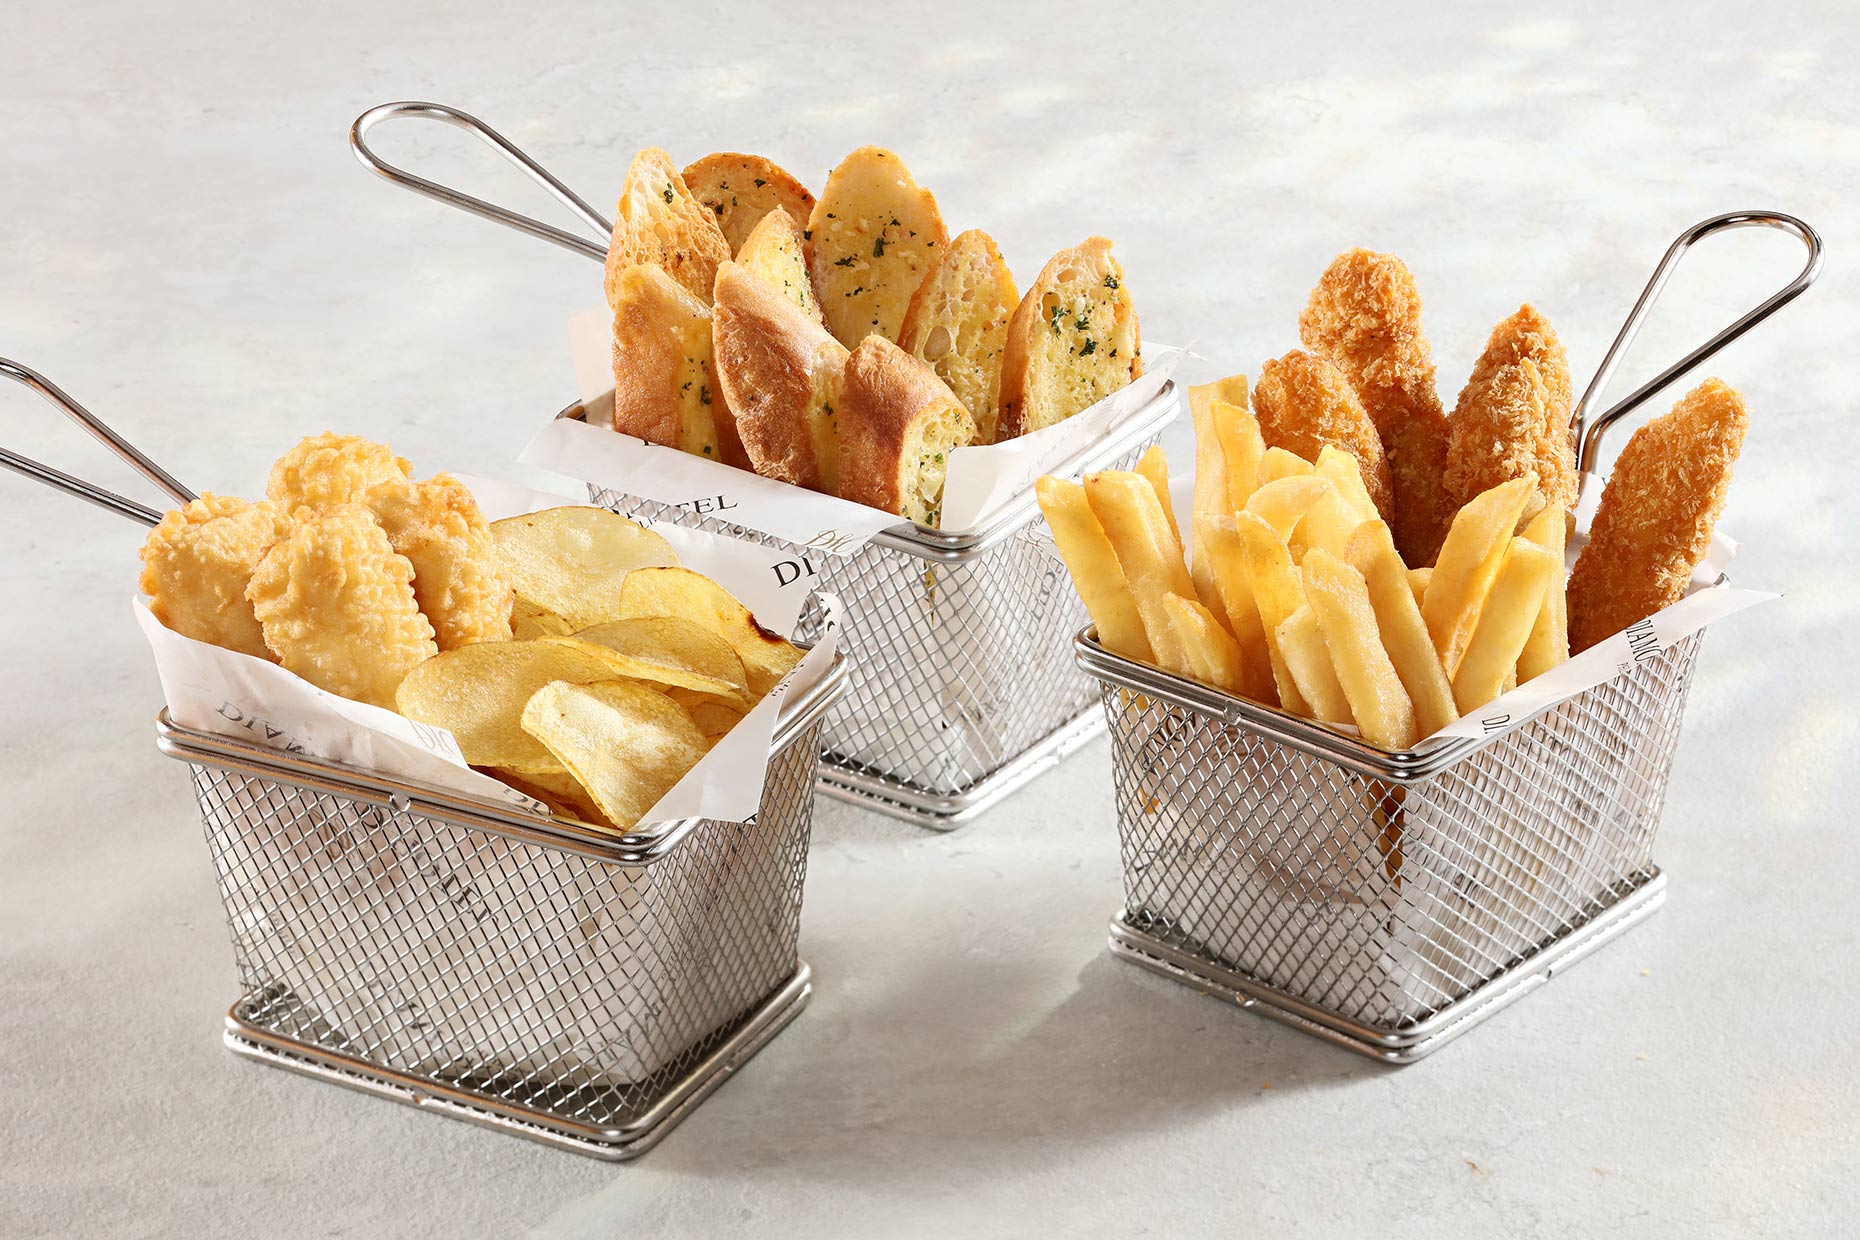 Fried snacks in baskets. Food photography and food styling for Diamond hotel, shot on location in Manila.